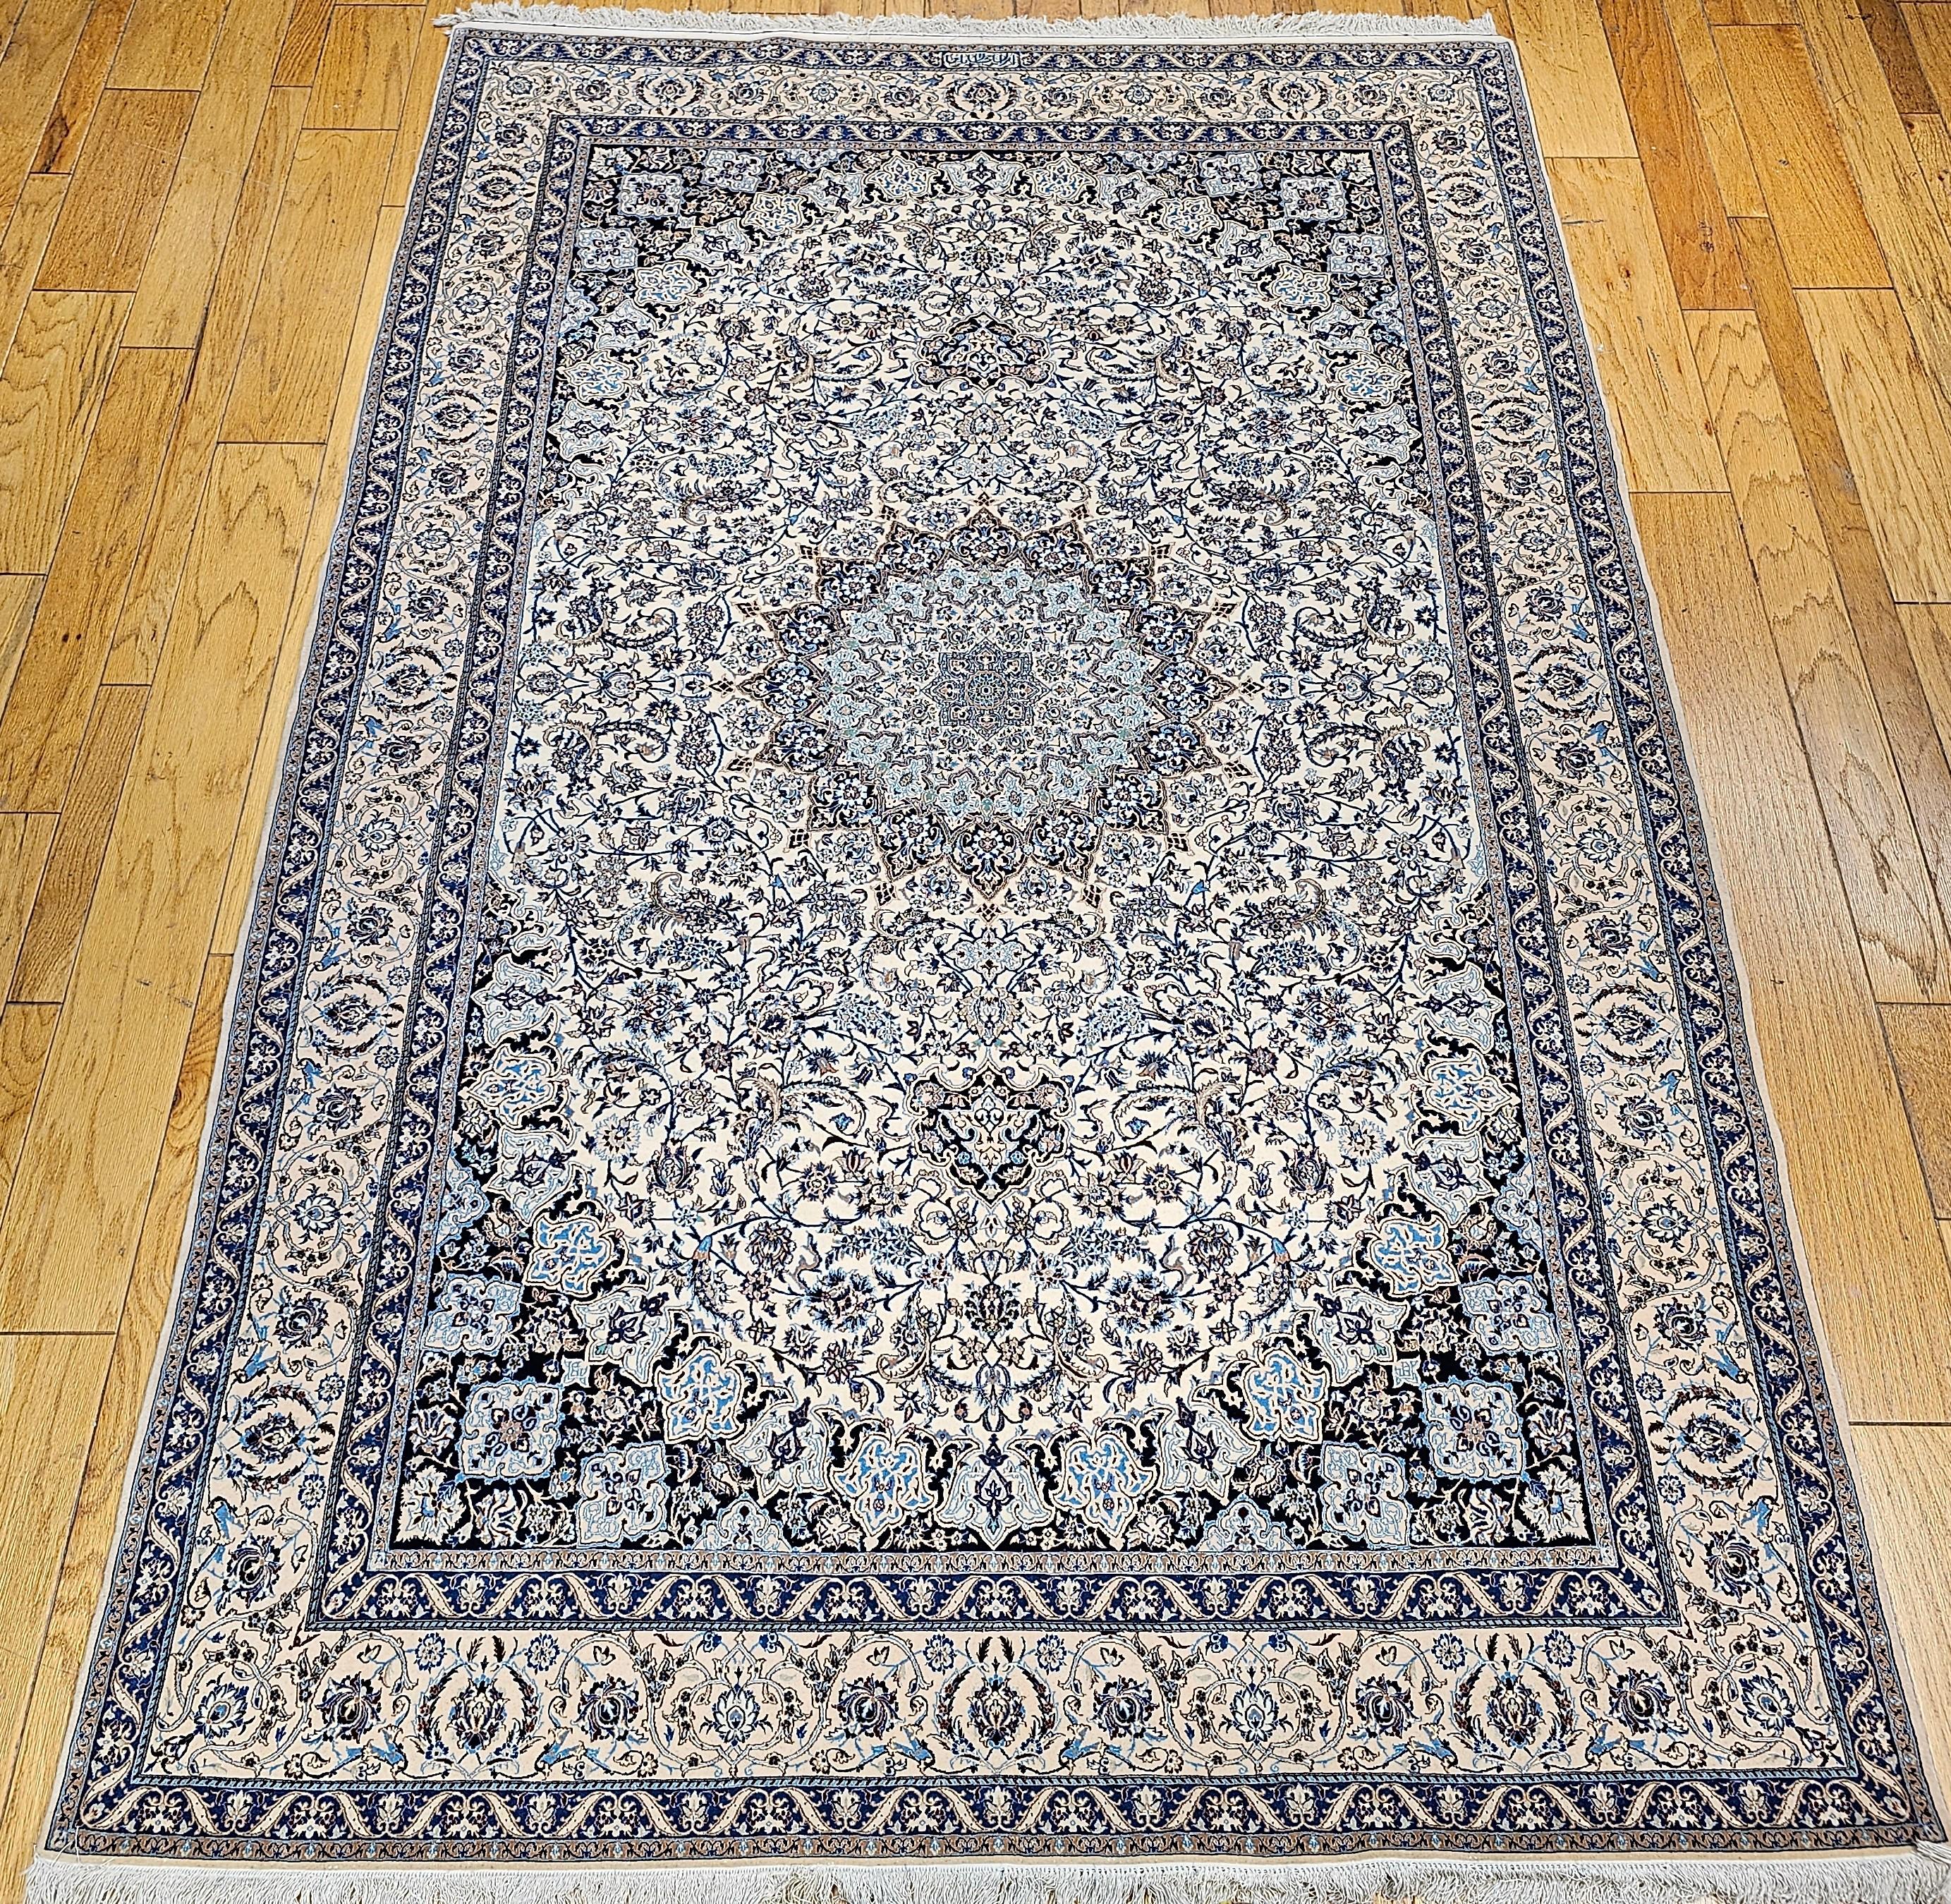  An extremely fine weave handwoven Nain area rug from the 4th quarter of the 1900s with a fine weave in ivory, pale blue.  This Nain has a beautiful floral design set in an ivory color field with a cream color border.  The Nain has one of the most